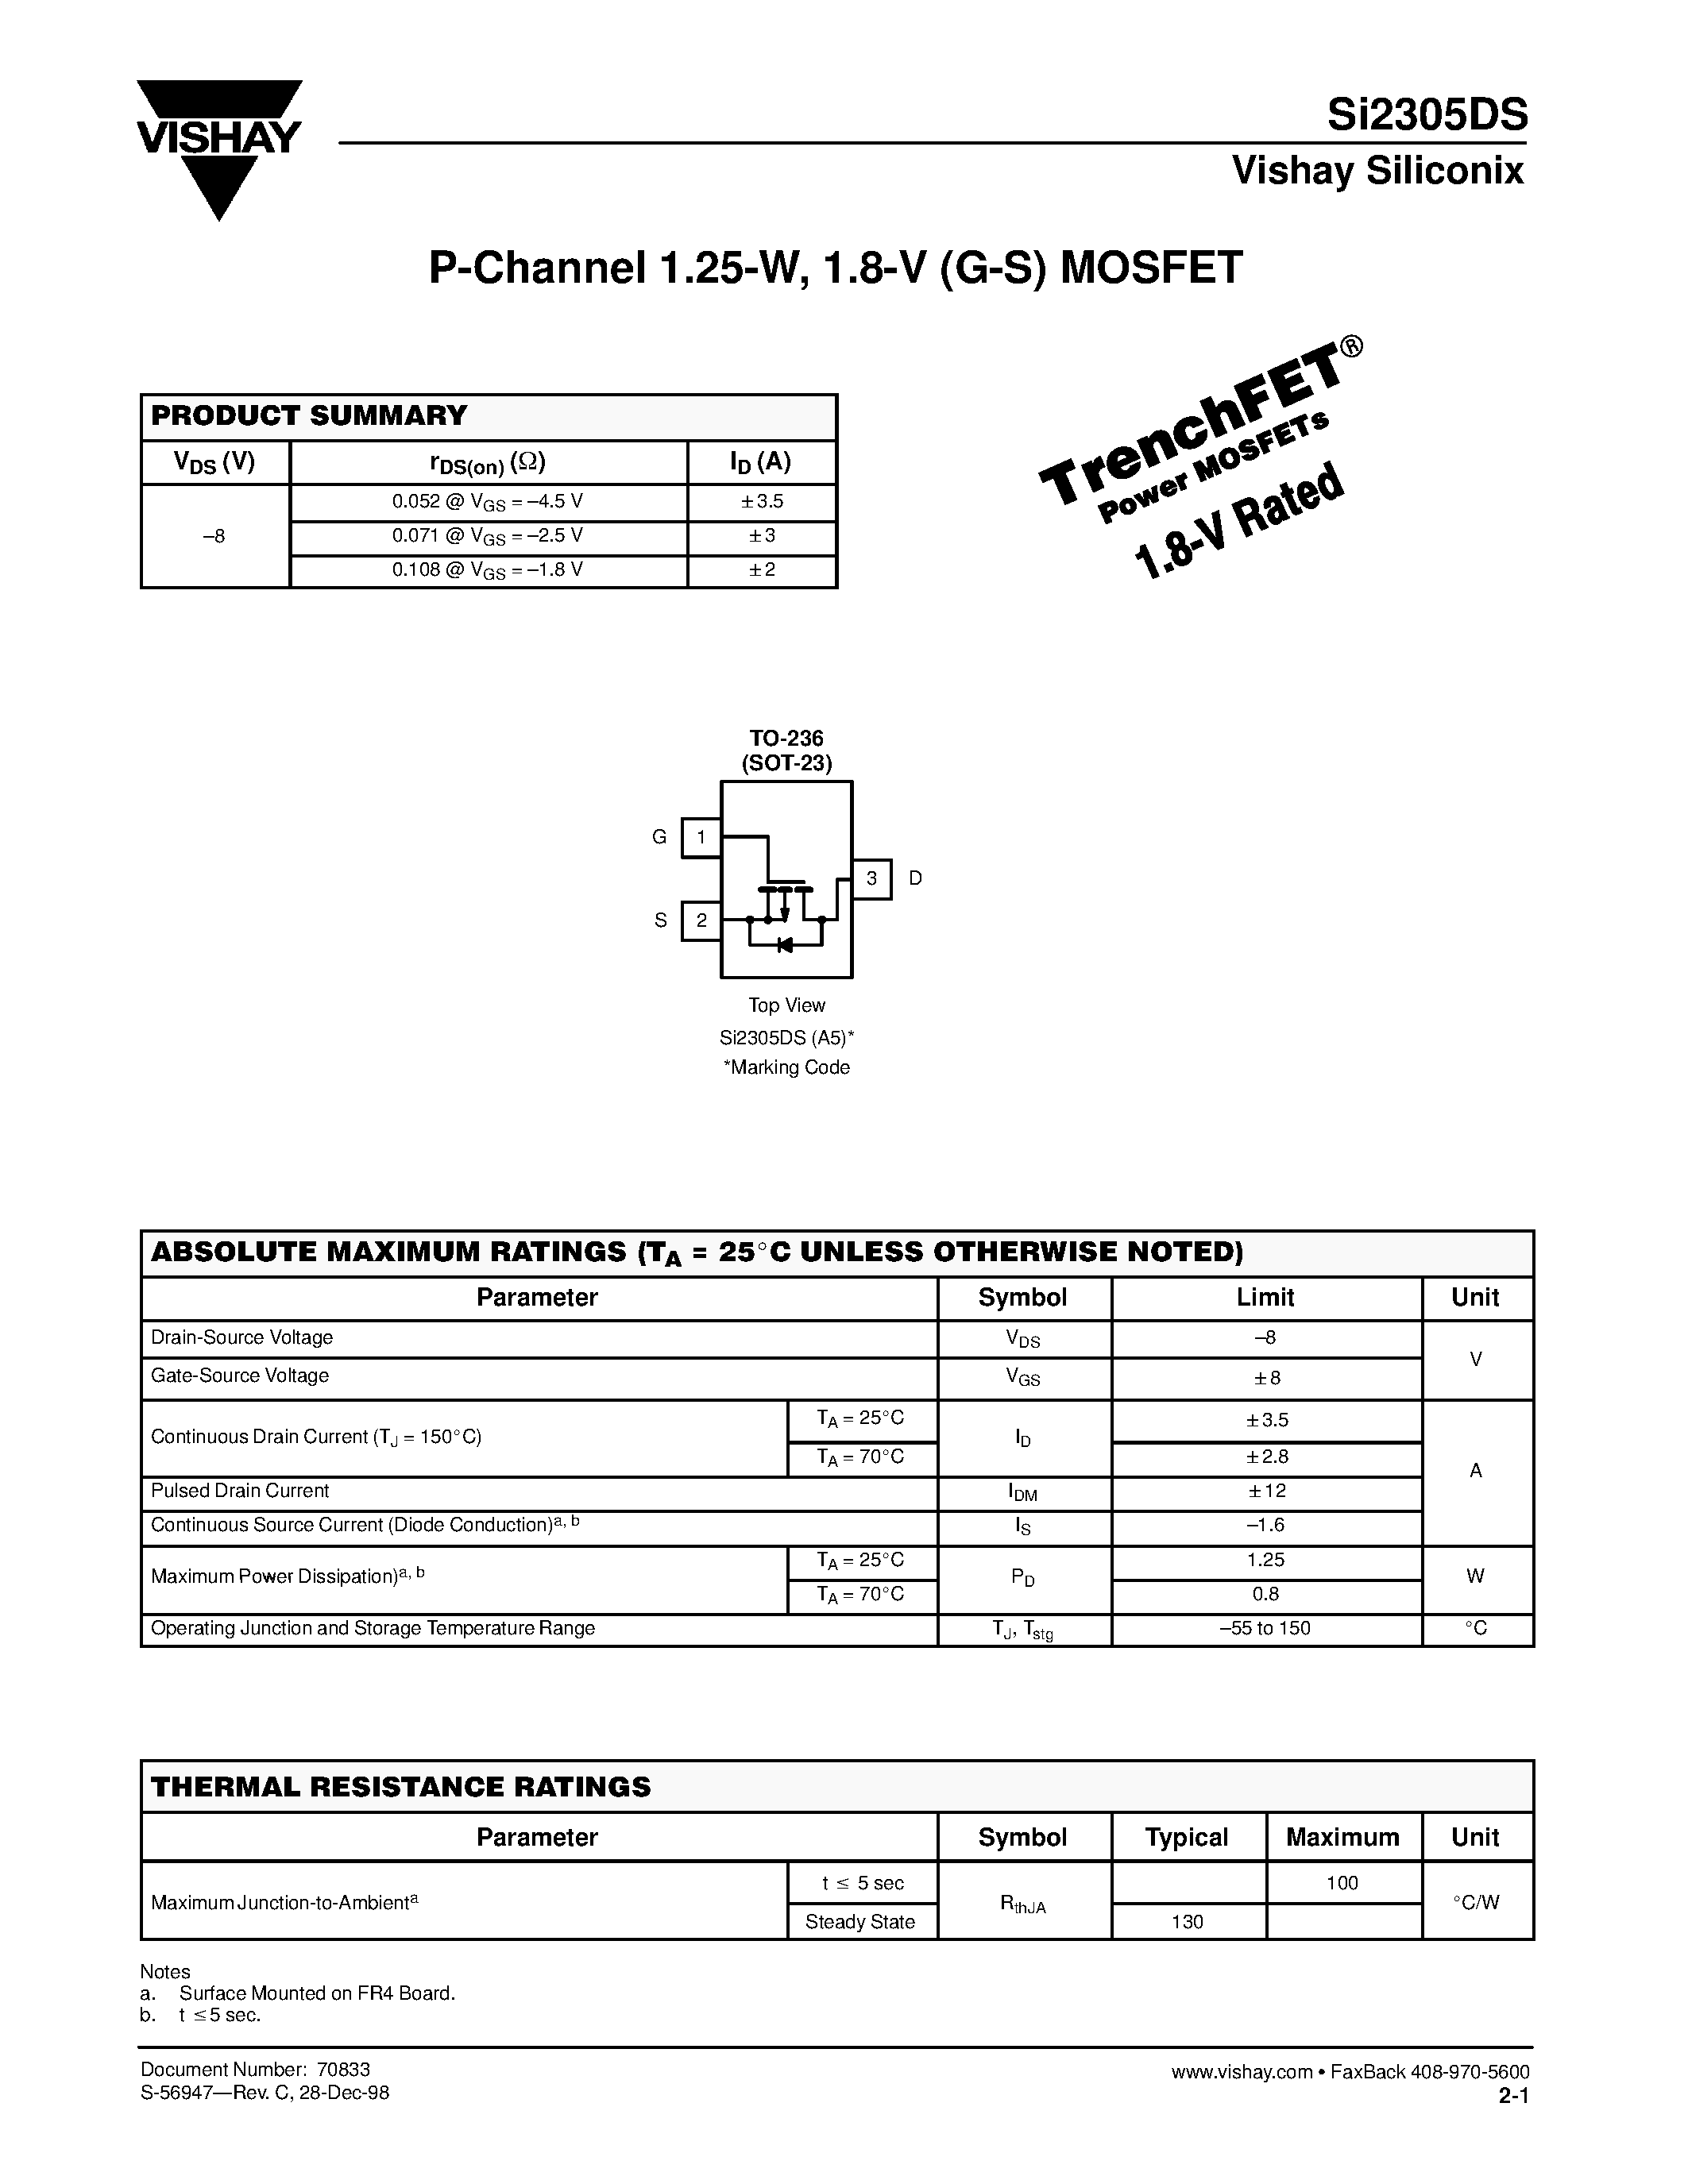 Datasheet SI2305DS - P-Channel 1.25-W/ 1.8-V (G-S) MOSFET page 1